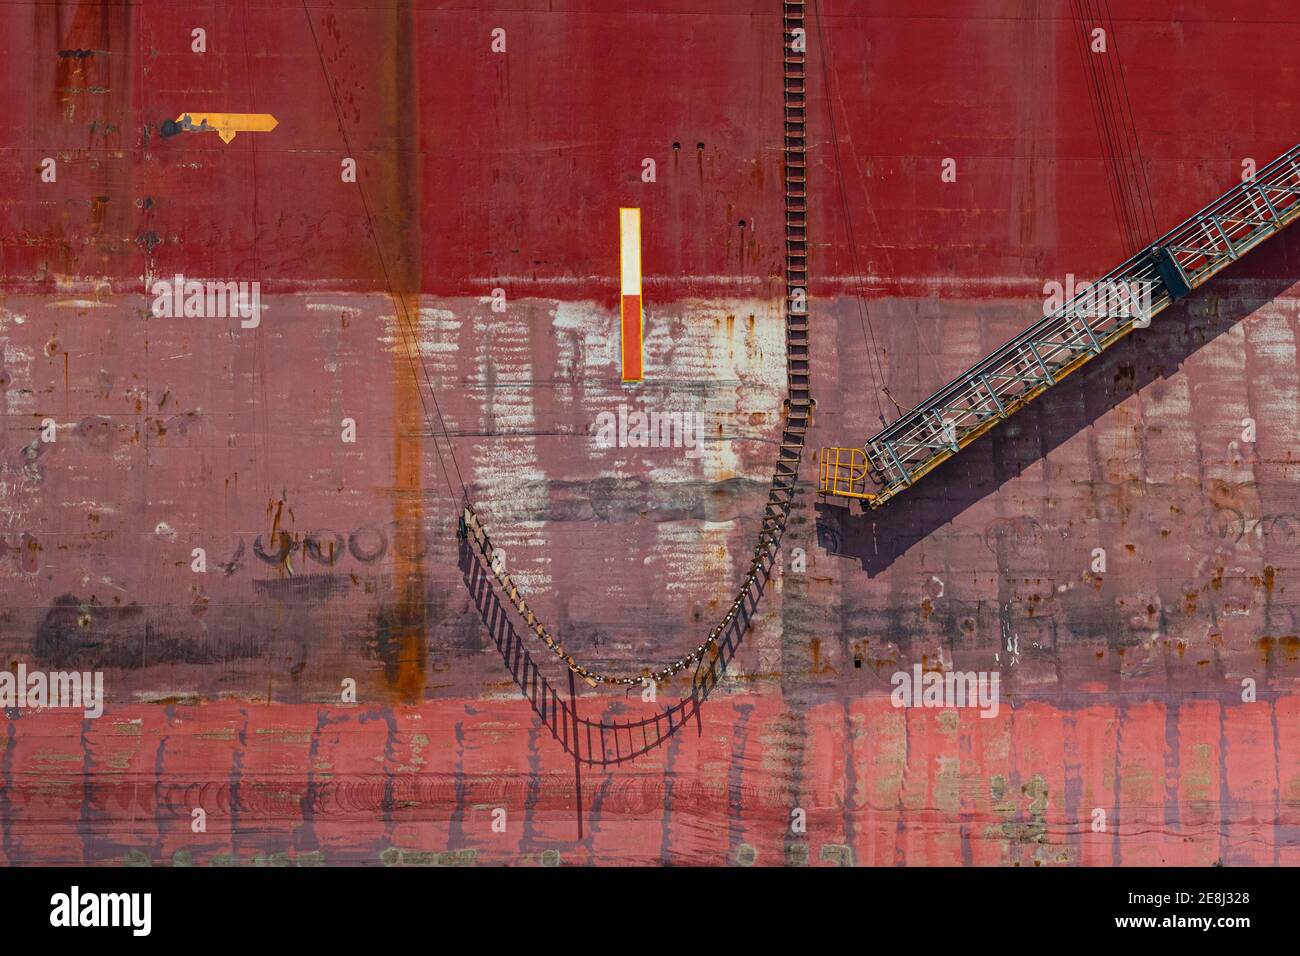 Close up of a huge container ship ready to getting break up, Chittagong Ship Breaking Yard, Chittagong, Bangladesh Stock Photo